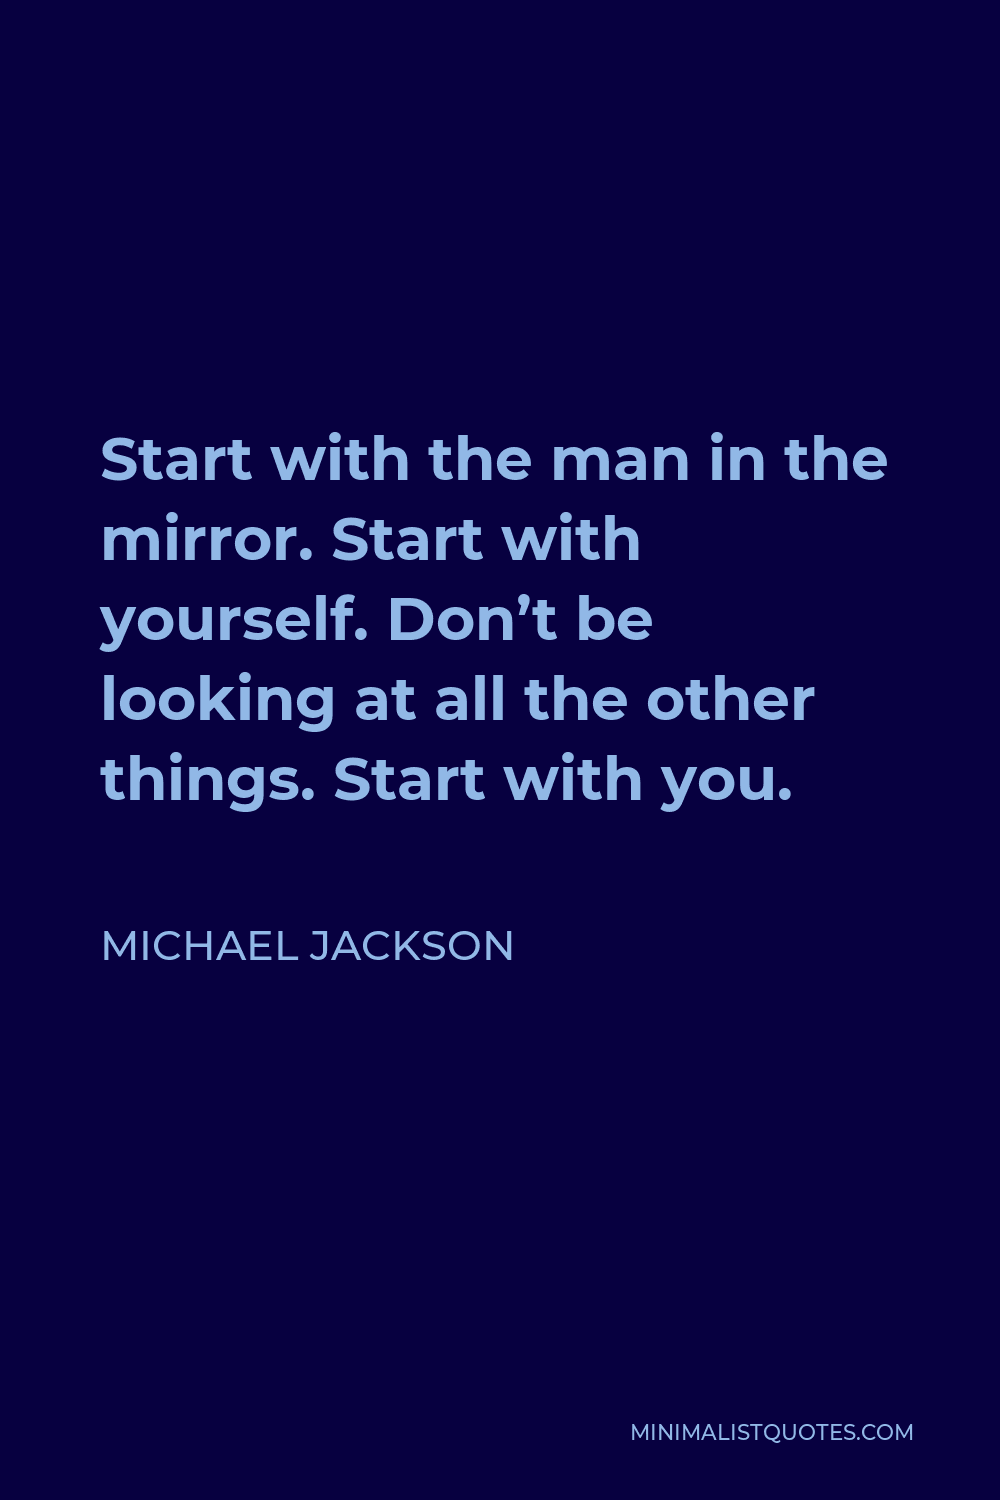 Michael Jackson Quote - Start with the man in the mirror. Start with yourself. Don’t be looking at all the other things. Start with you.